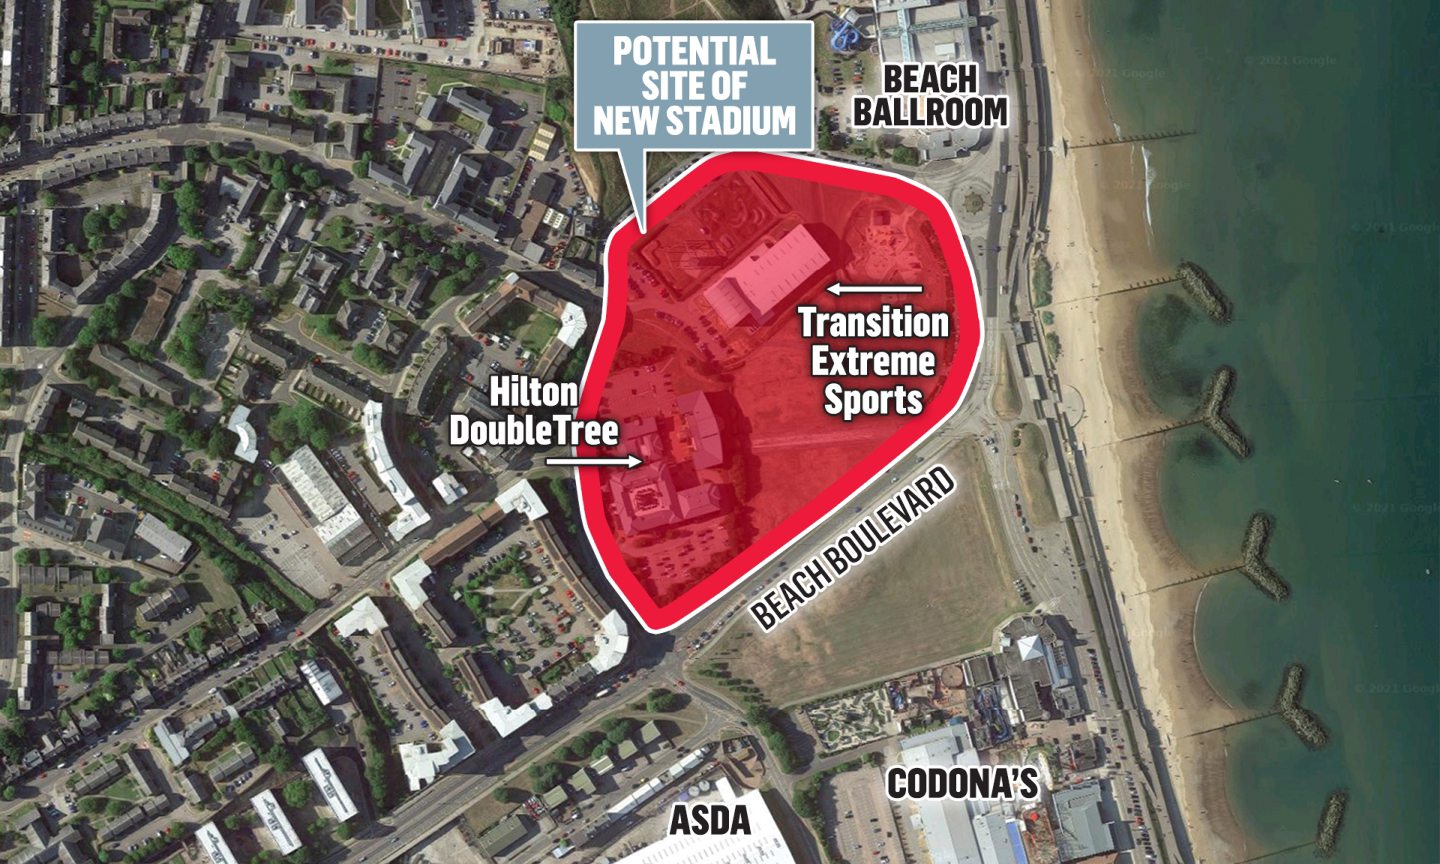 Plans for a new stadium for Aberdeen to be potentially built on the site of Hilton Double Tree.